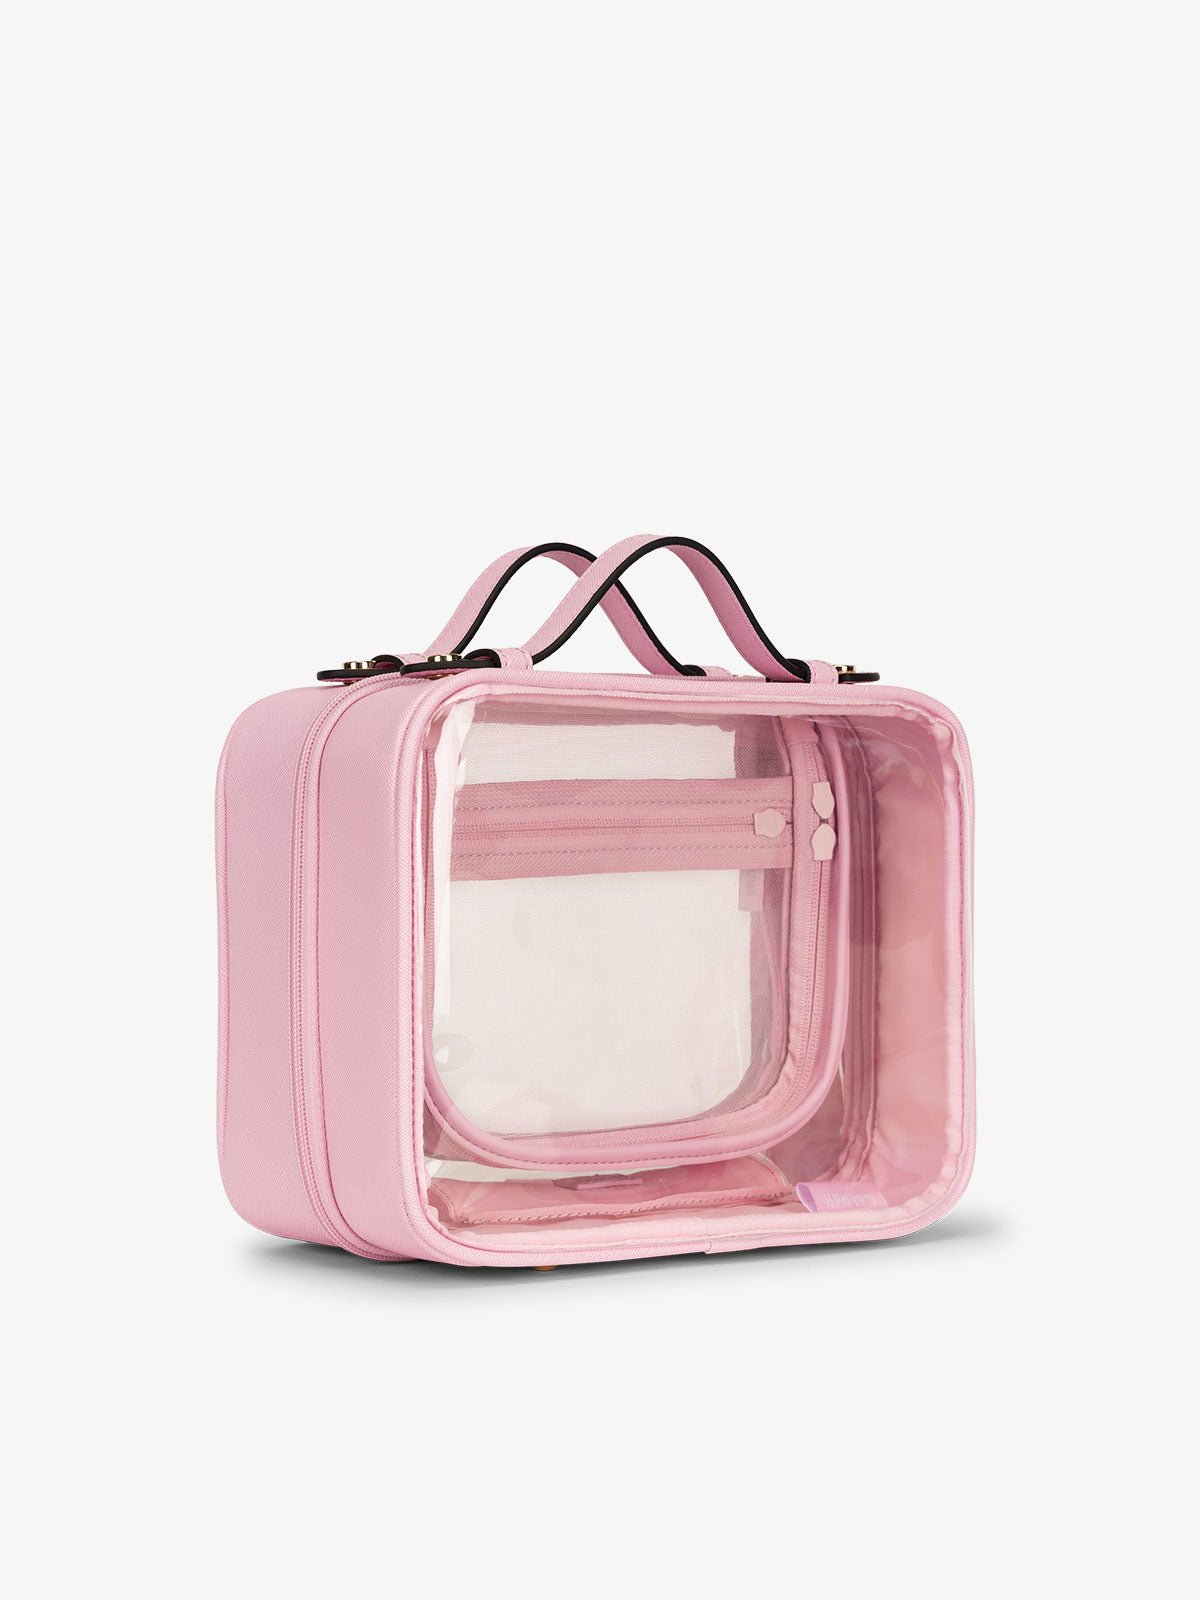 CALPAK clear makeup bag with top handles in strawberry